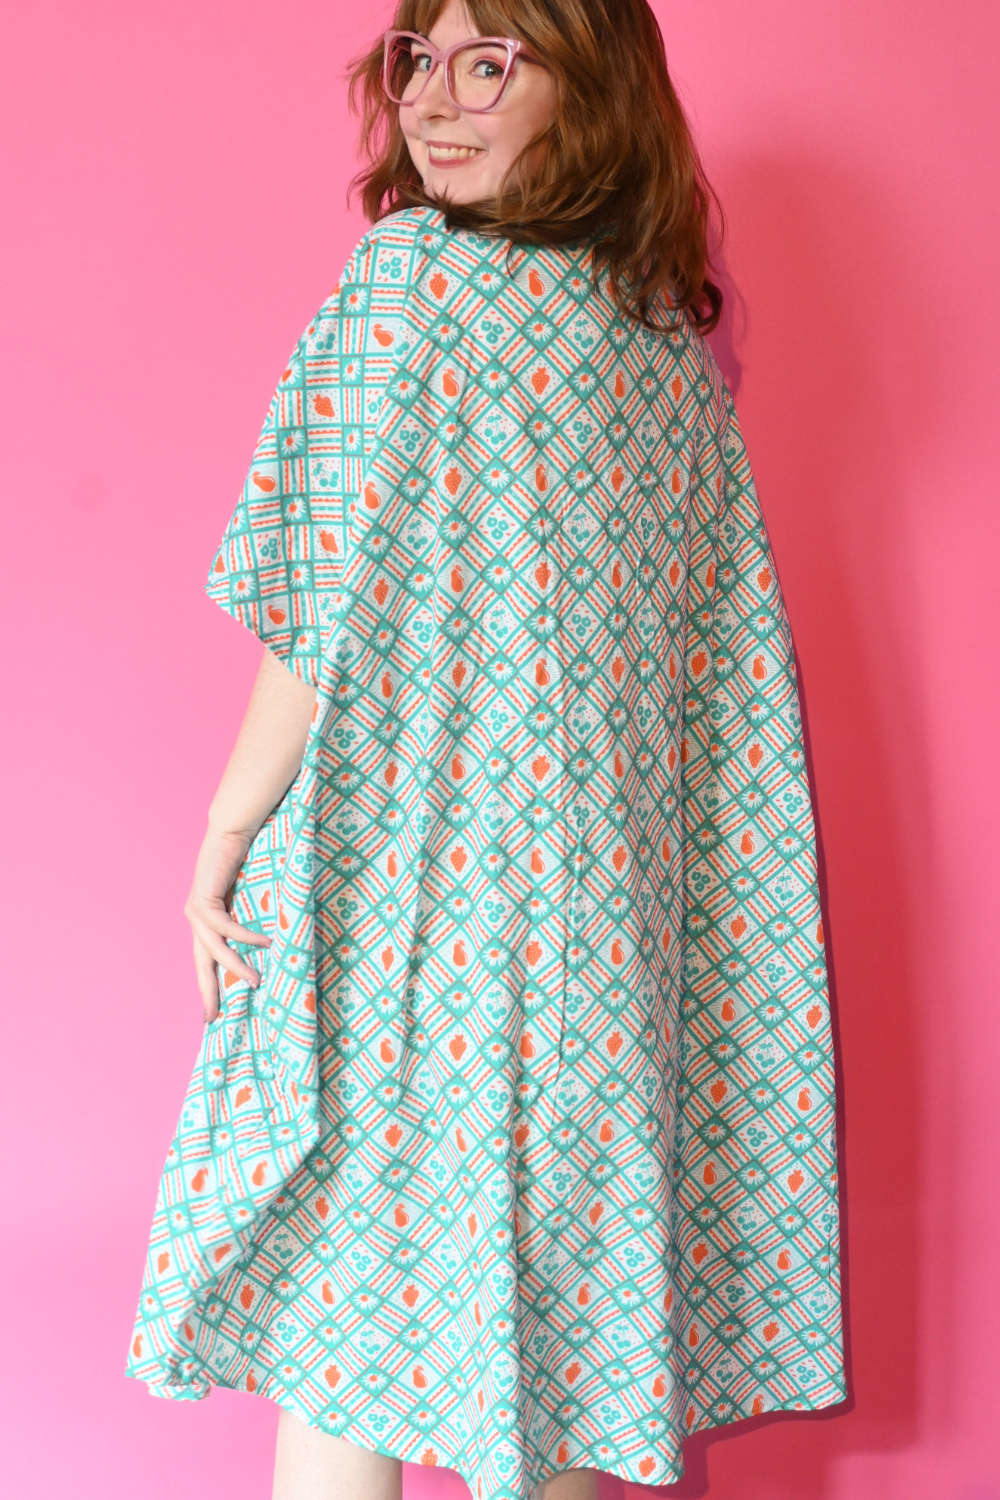 Back of Caftan dress in teal and orange featuring graphic of fruit and flowers